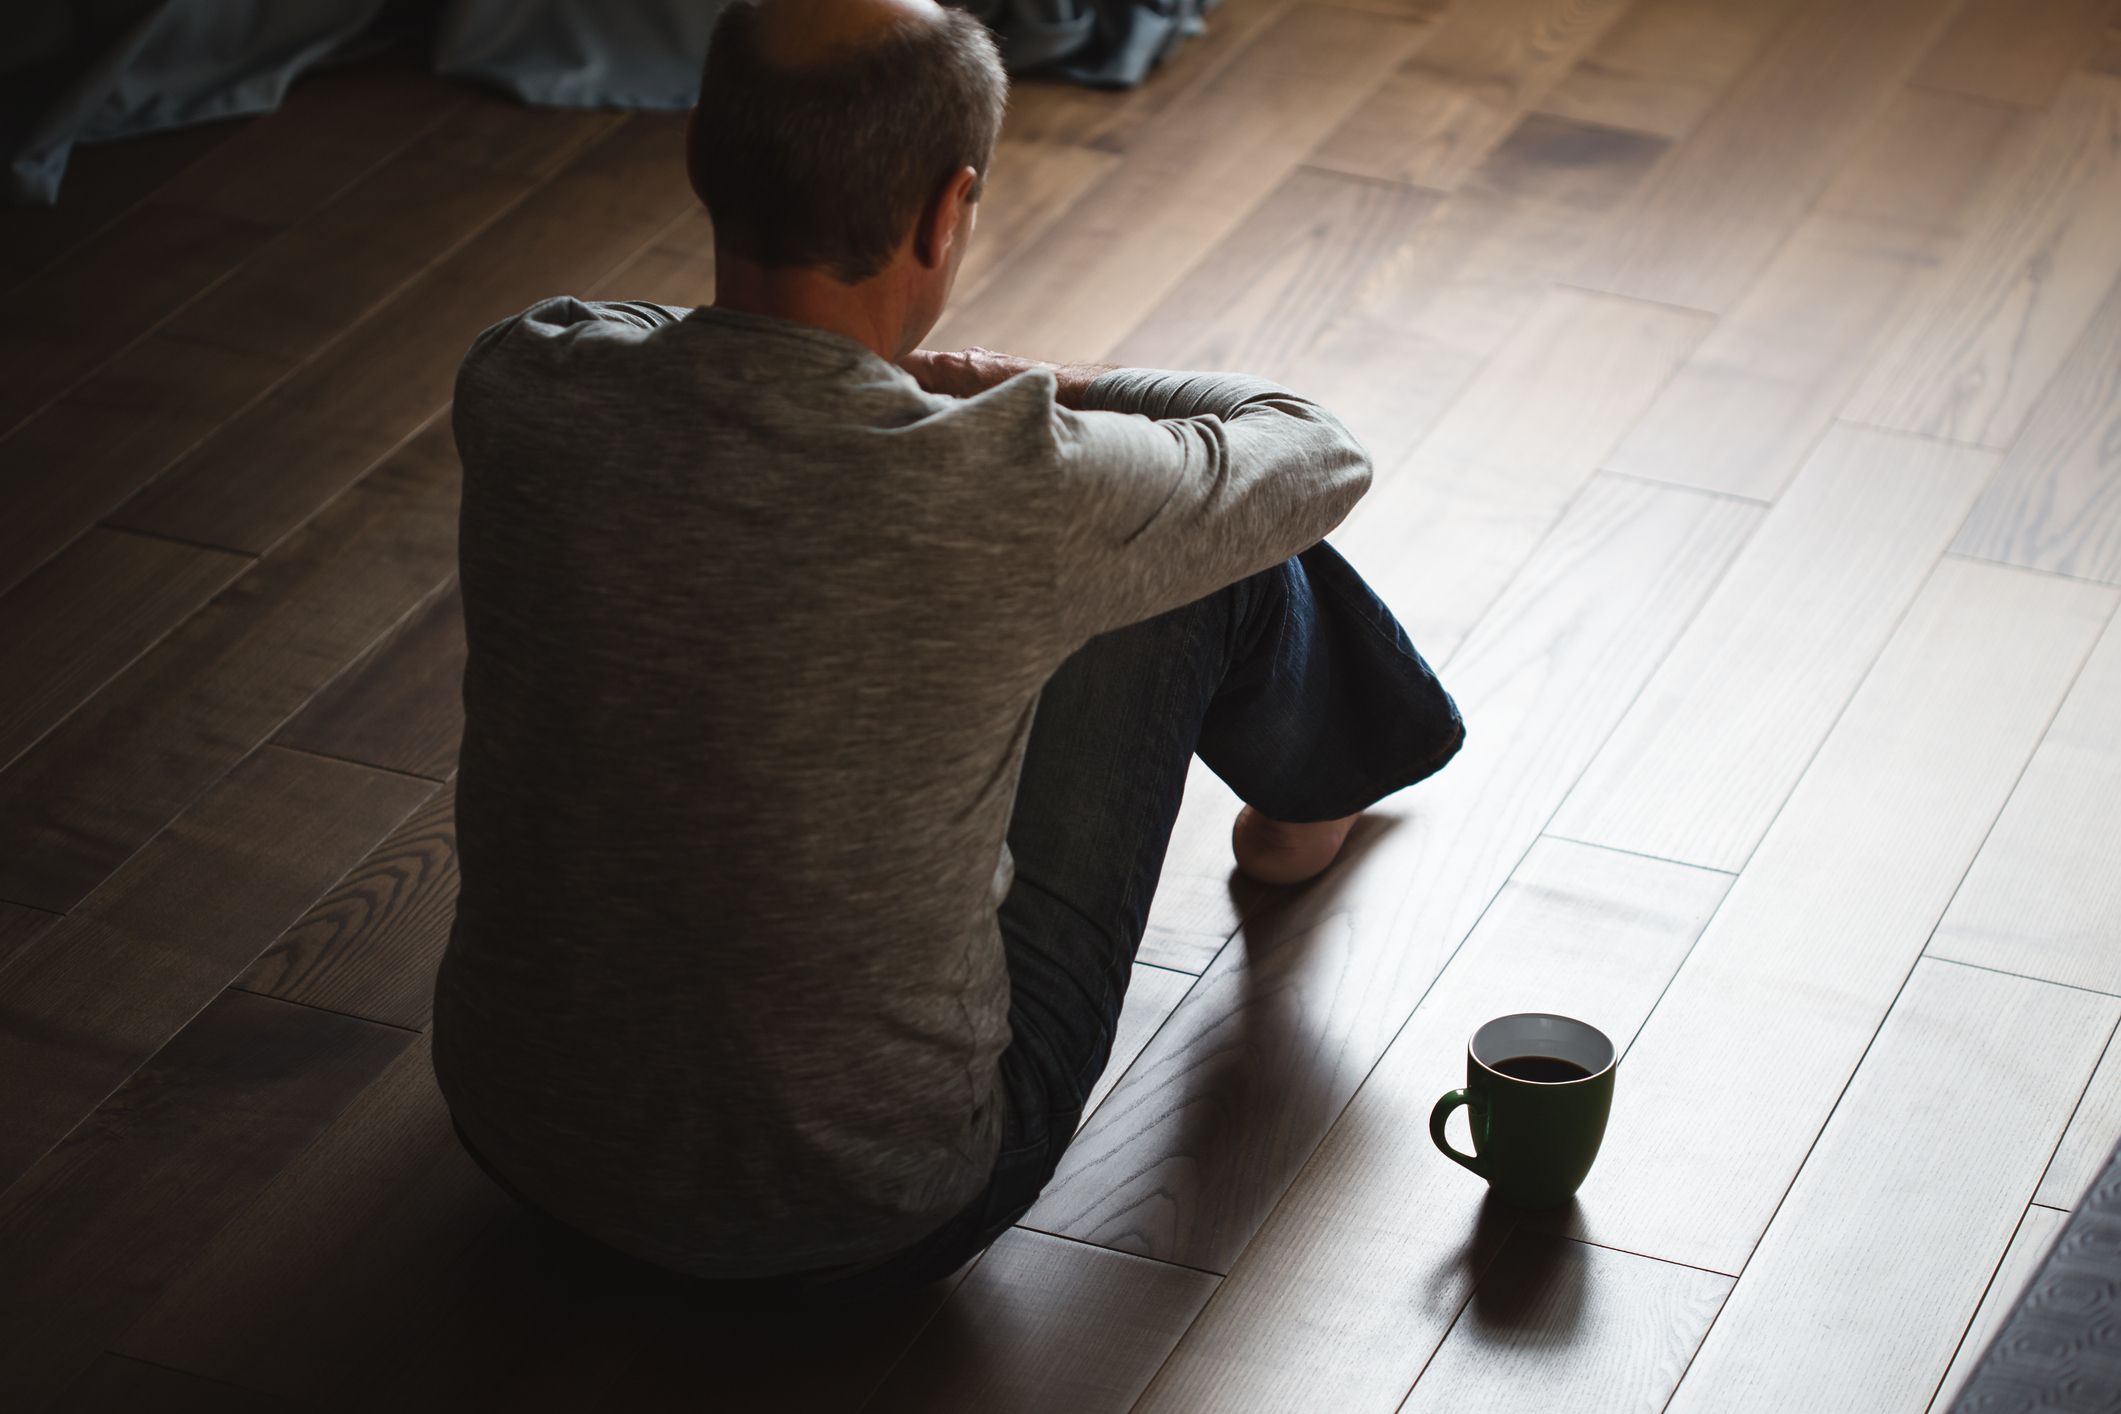 A person deep in thought, sitting on floor with back to camera, holding knees, near a mug